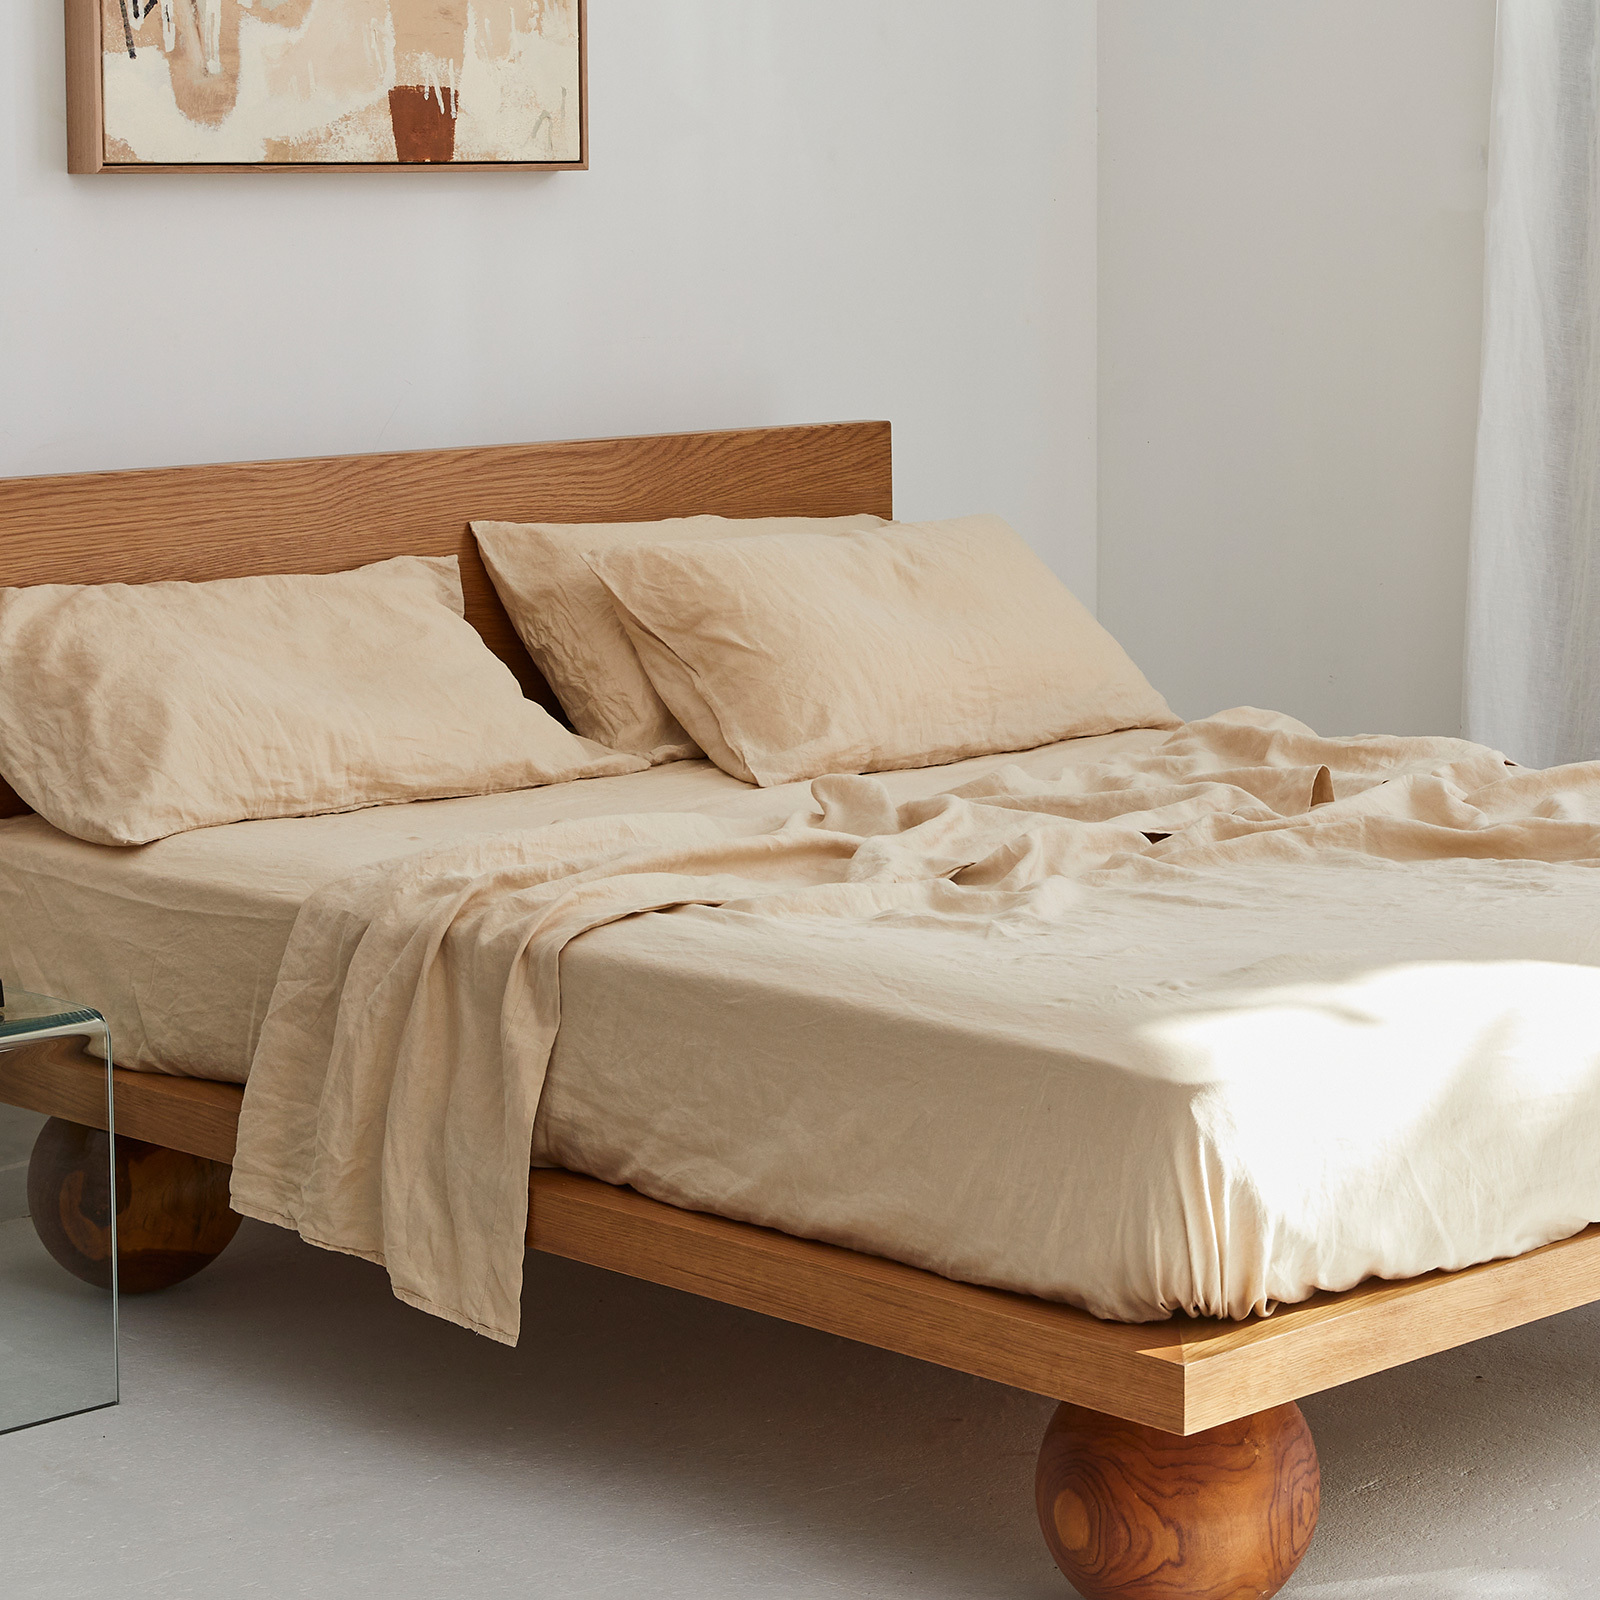 French linen Flat Sheet in Crème